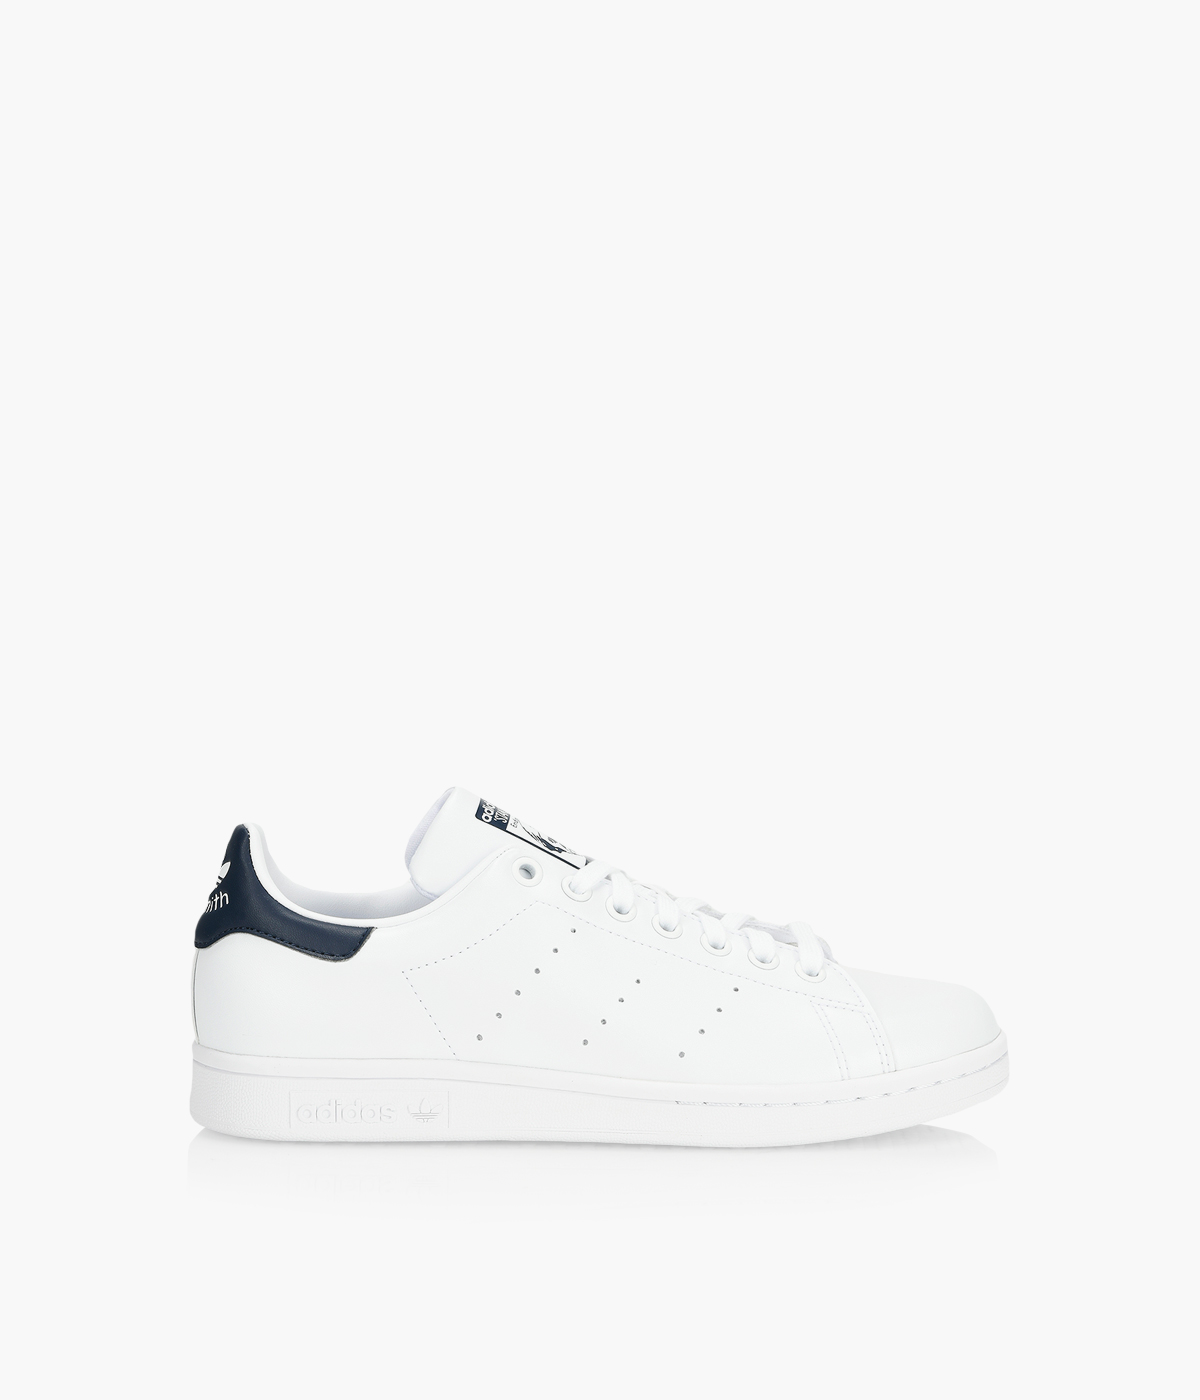 ADIDAS STAN SMITH W - White Synthetic | BrownsShoes